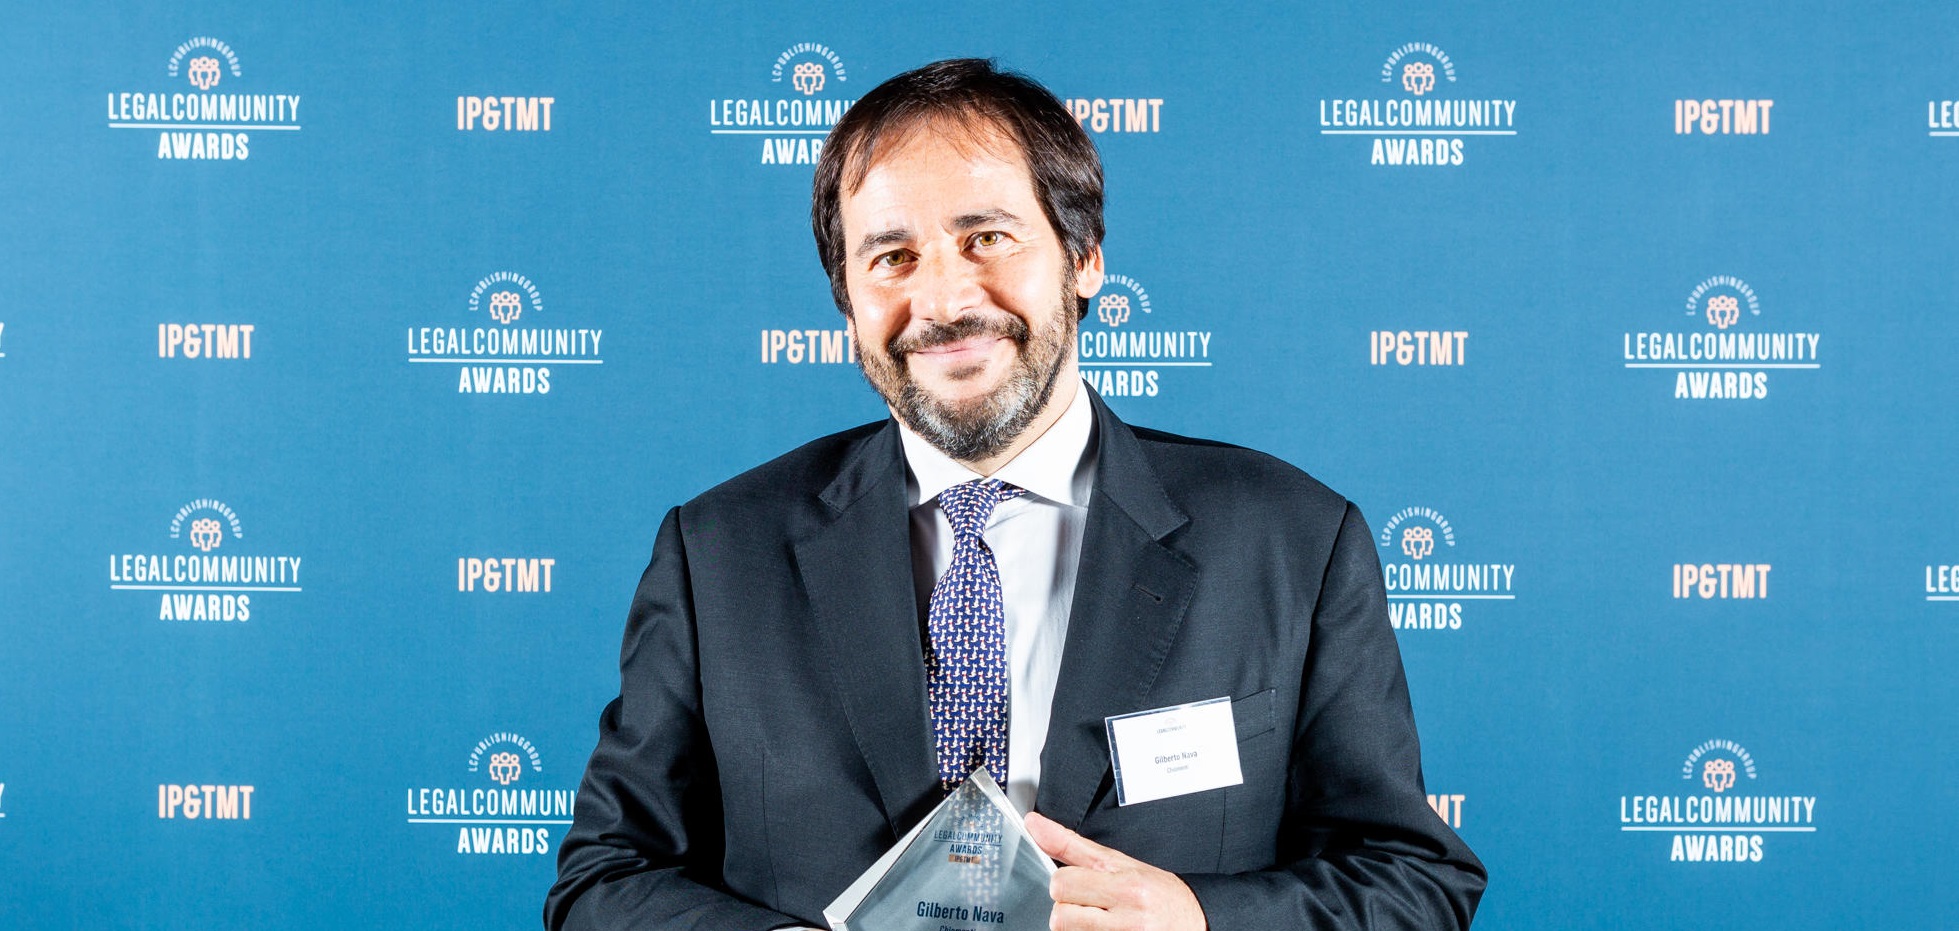 Legalcommunity IP & TMT Awards 2019, Chiomenti’s partner Gilberto Nava awarded as “Lawyer of the Year Telecommunications”